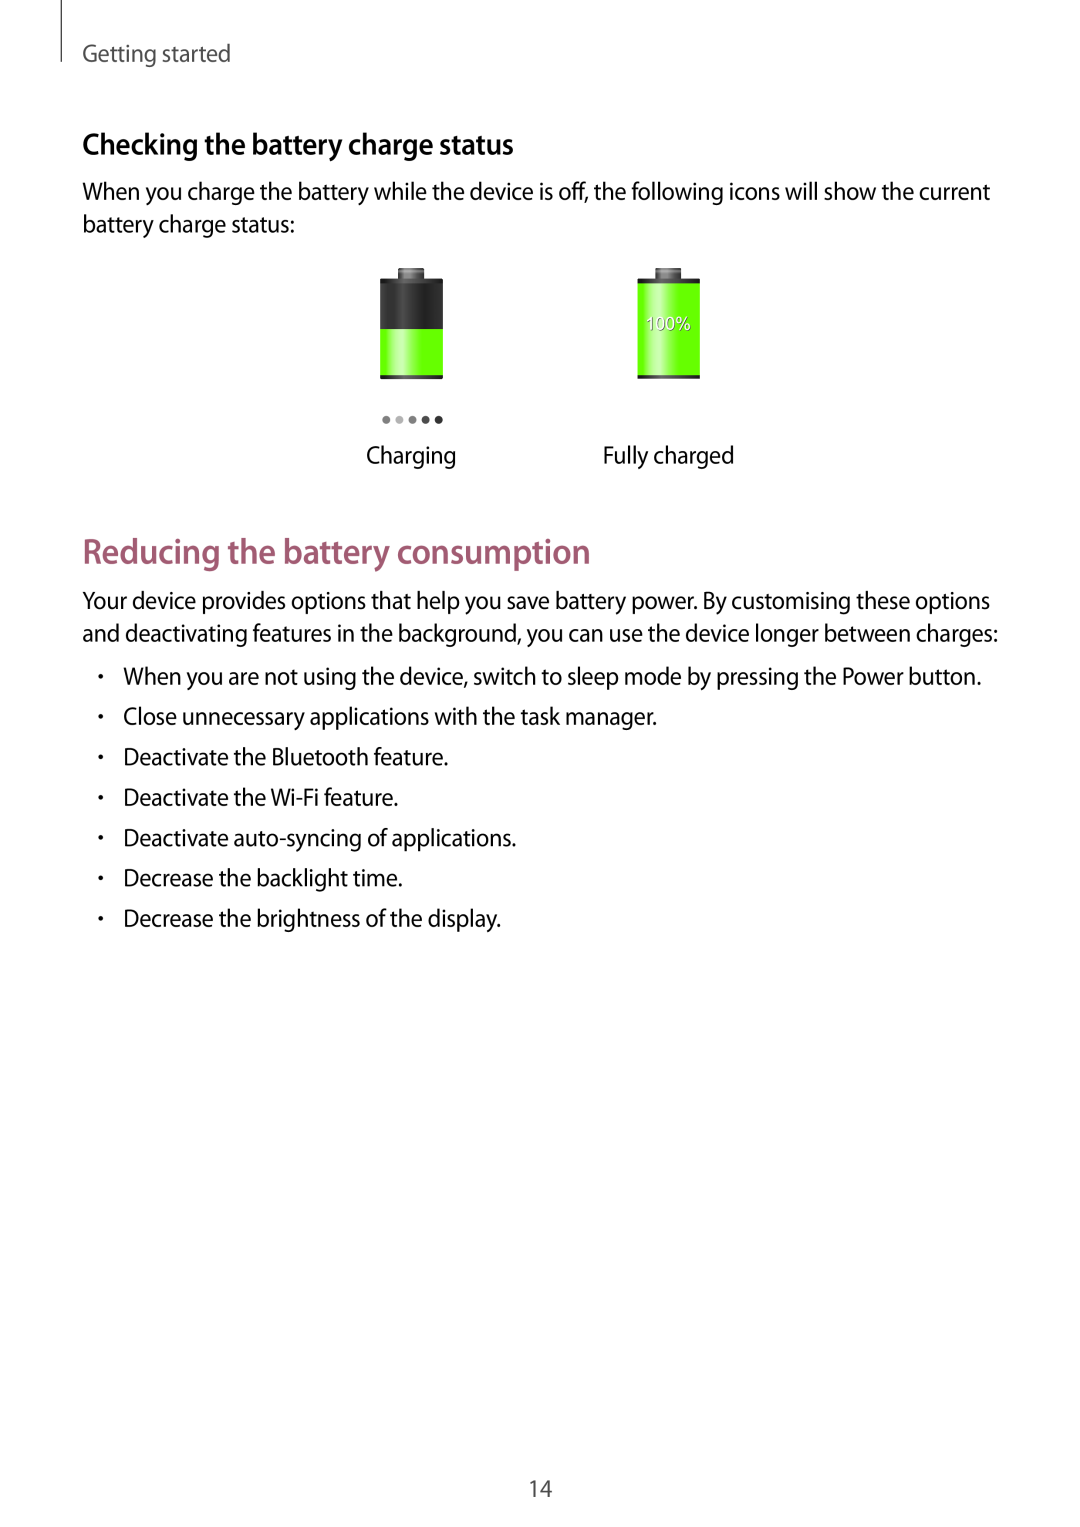 Samsung GT-N8000ZWEATO manual Reducing the battery consumption, Checking the battery charge status, Getting started 